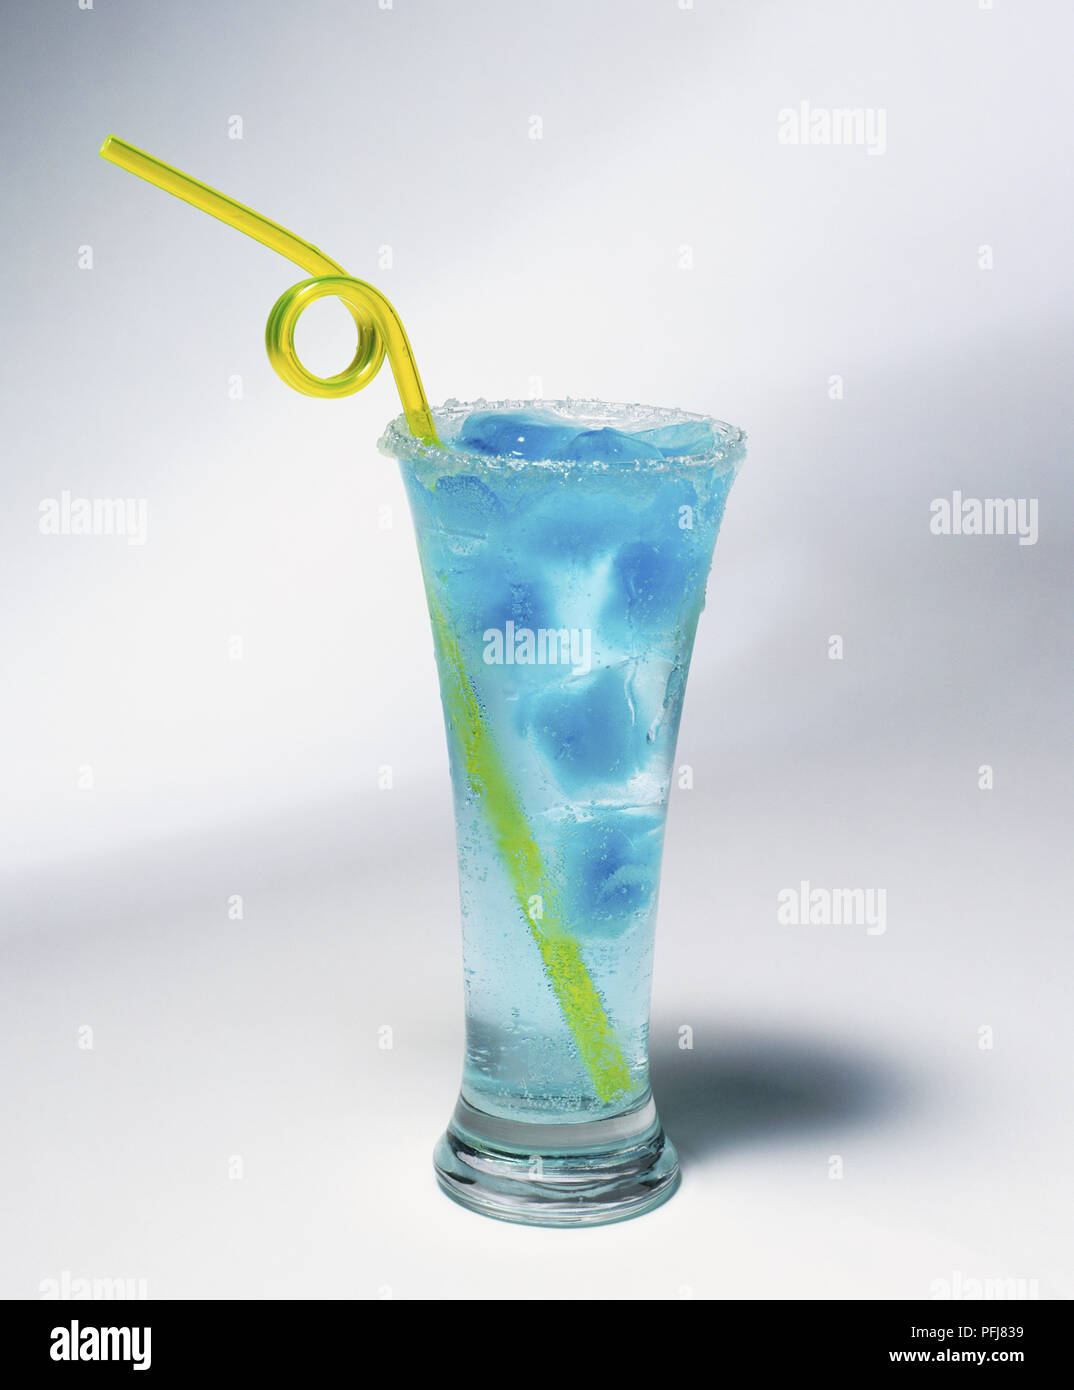 Tall glass of water with blue ice cubes and a curly yellow plastic straw Stock Photo